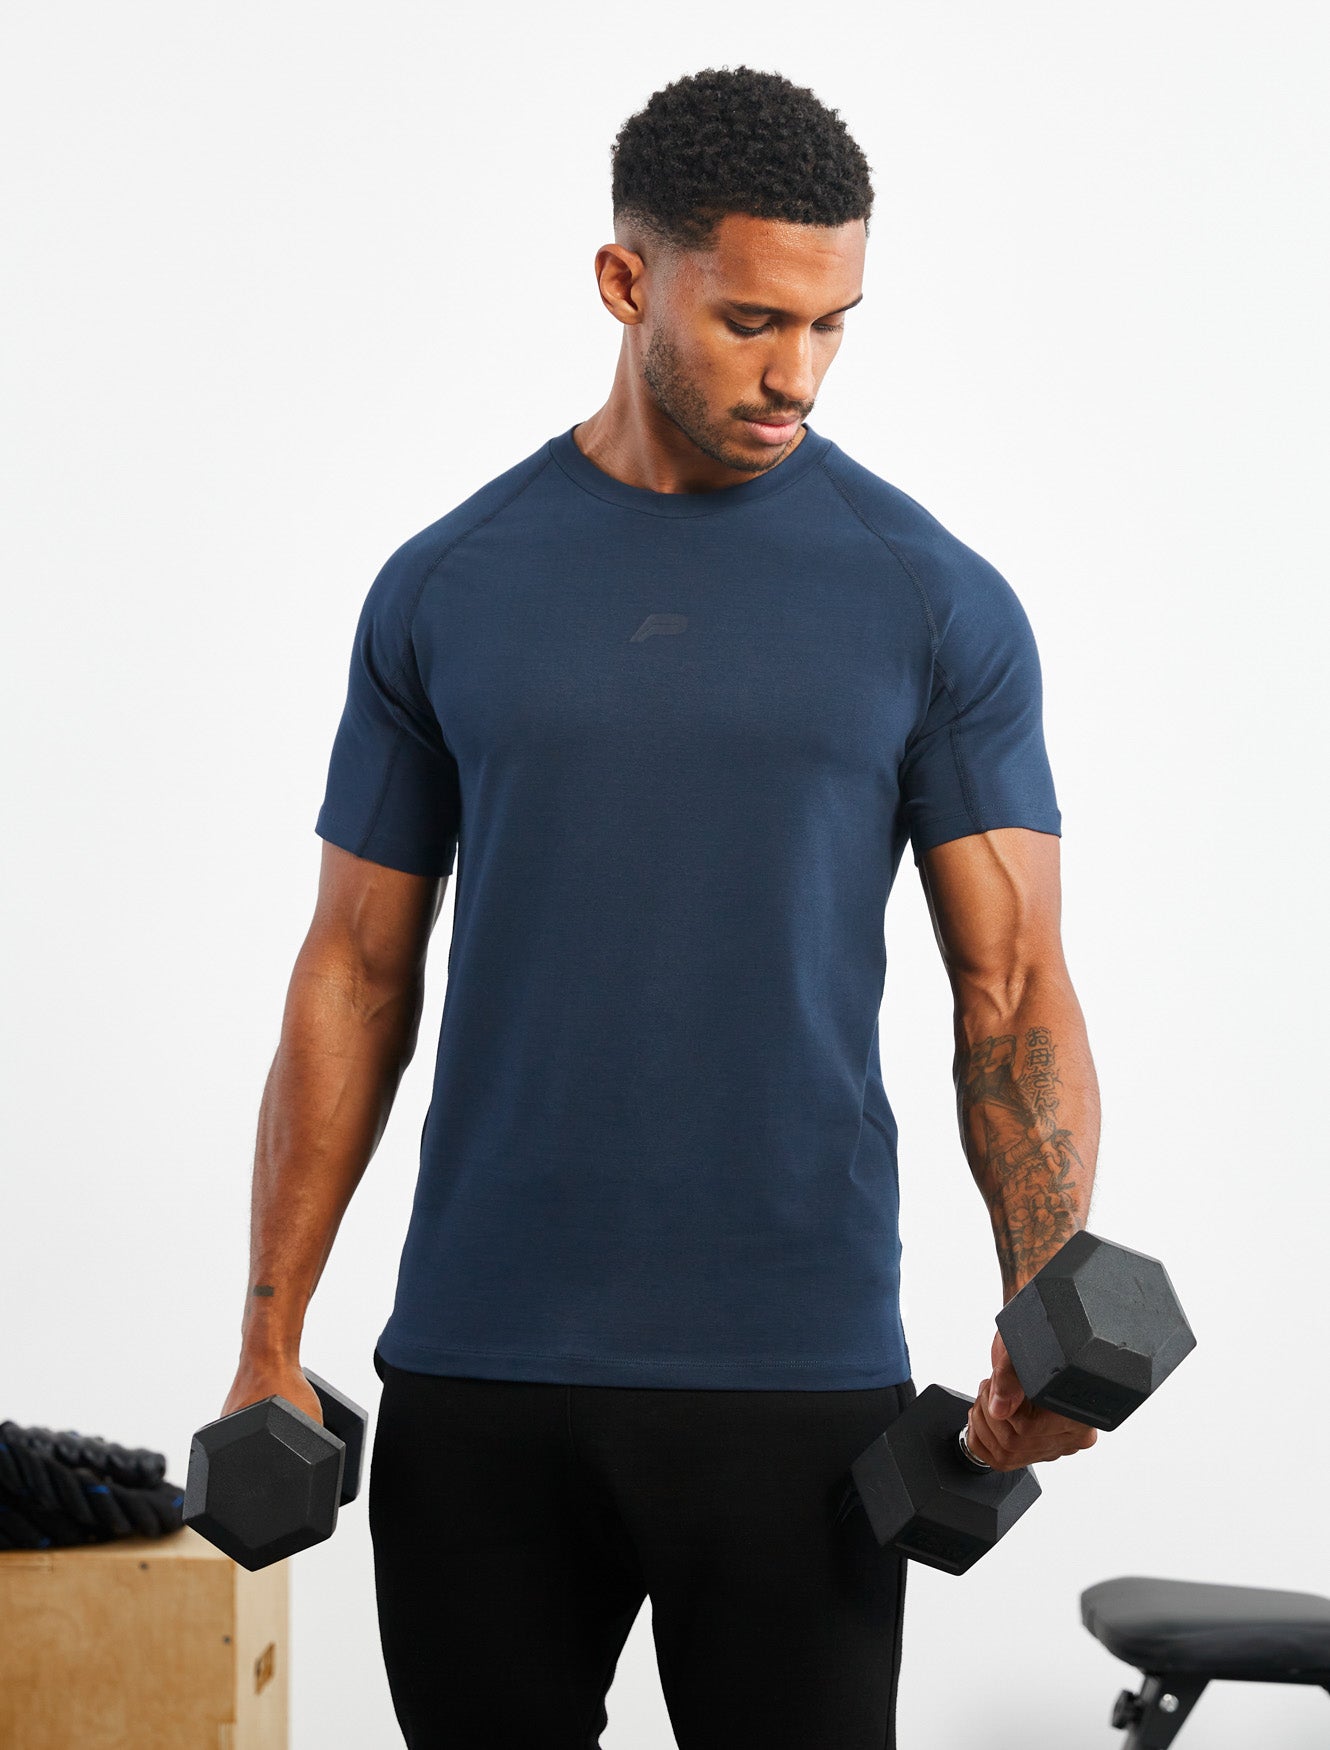 Icon T-Shirt / Navy Pursue Fitness 2